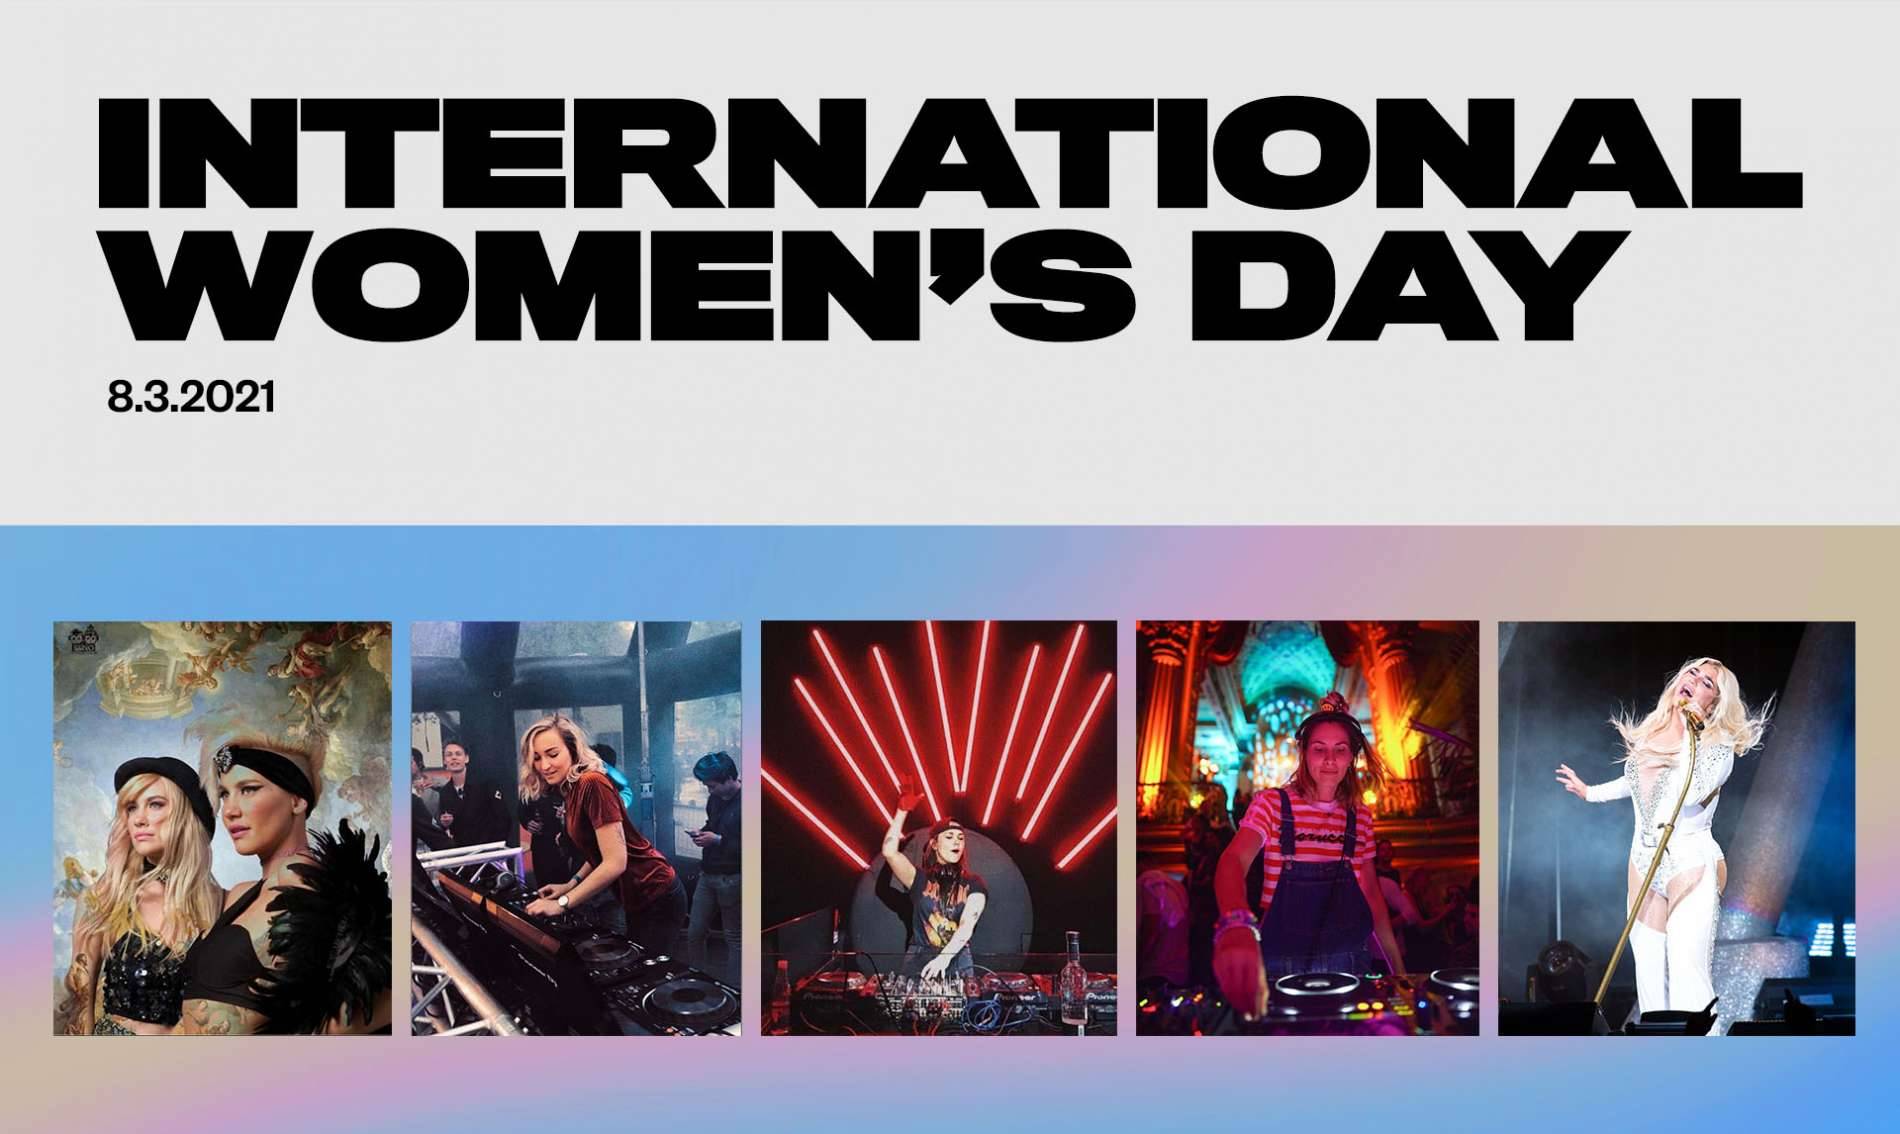 5 FEMALE ARTISTS TO LOOK OUT FOR ON INTERNATIONAL WOMEN'S DAY